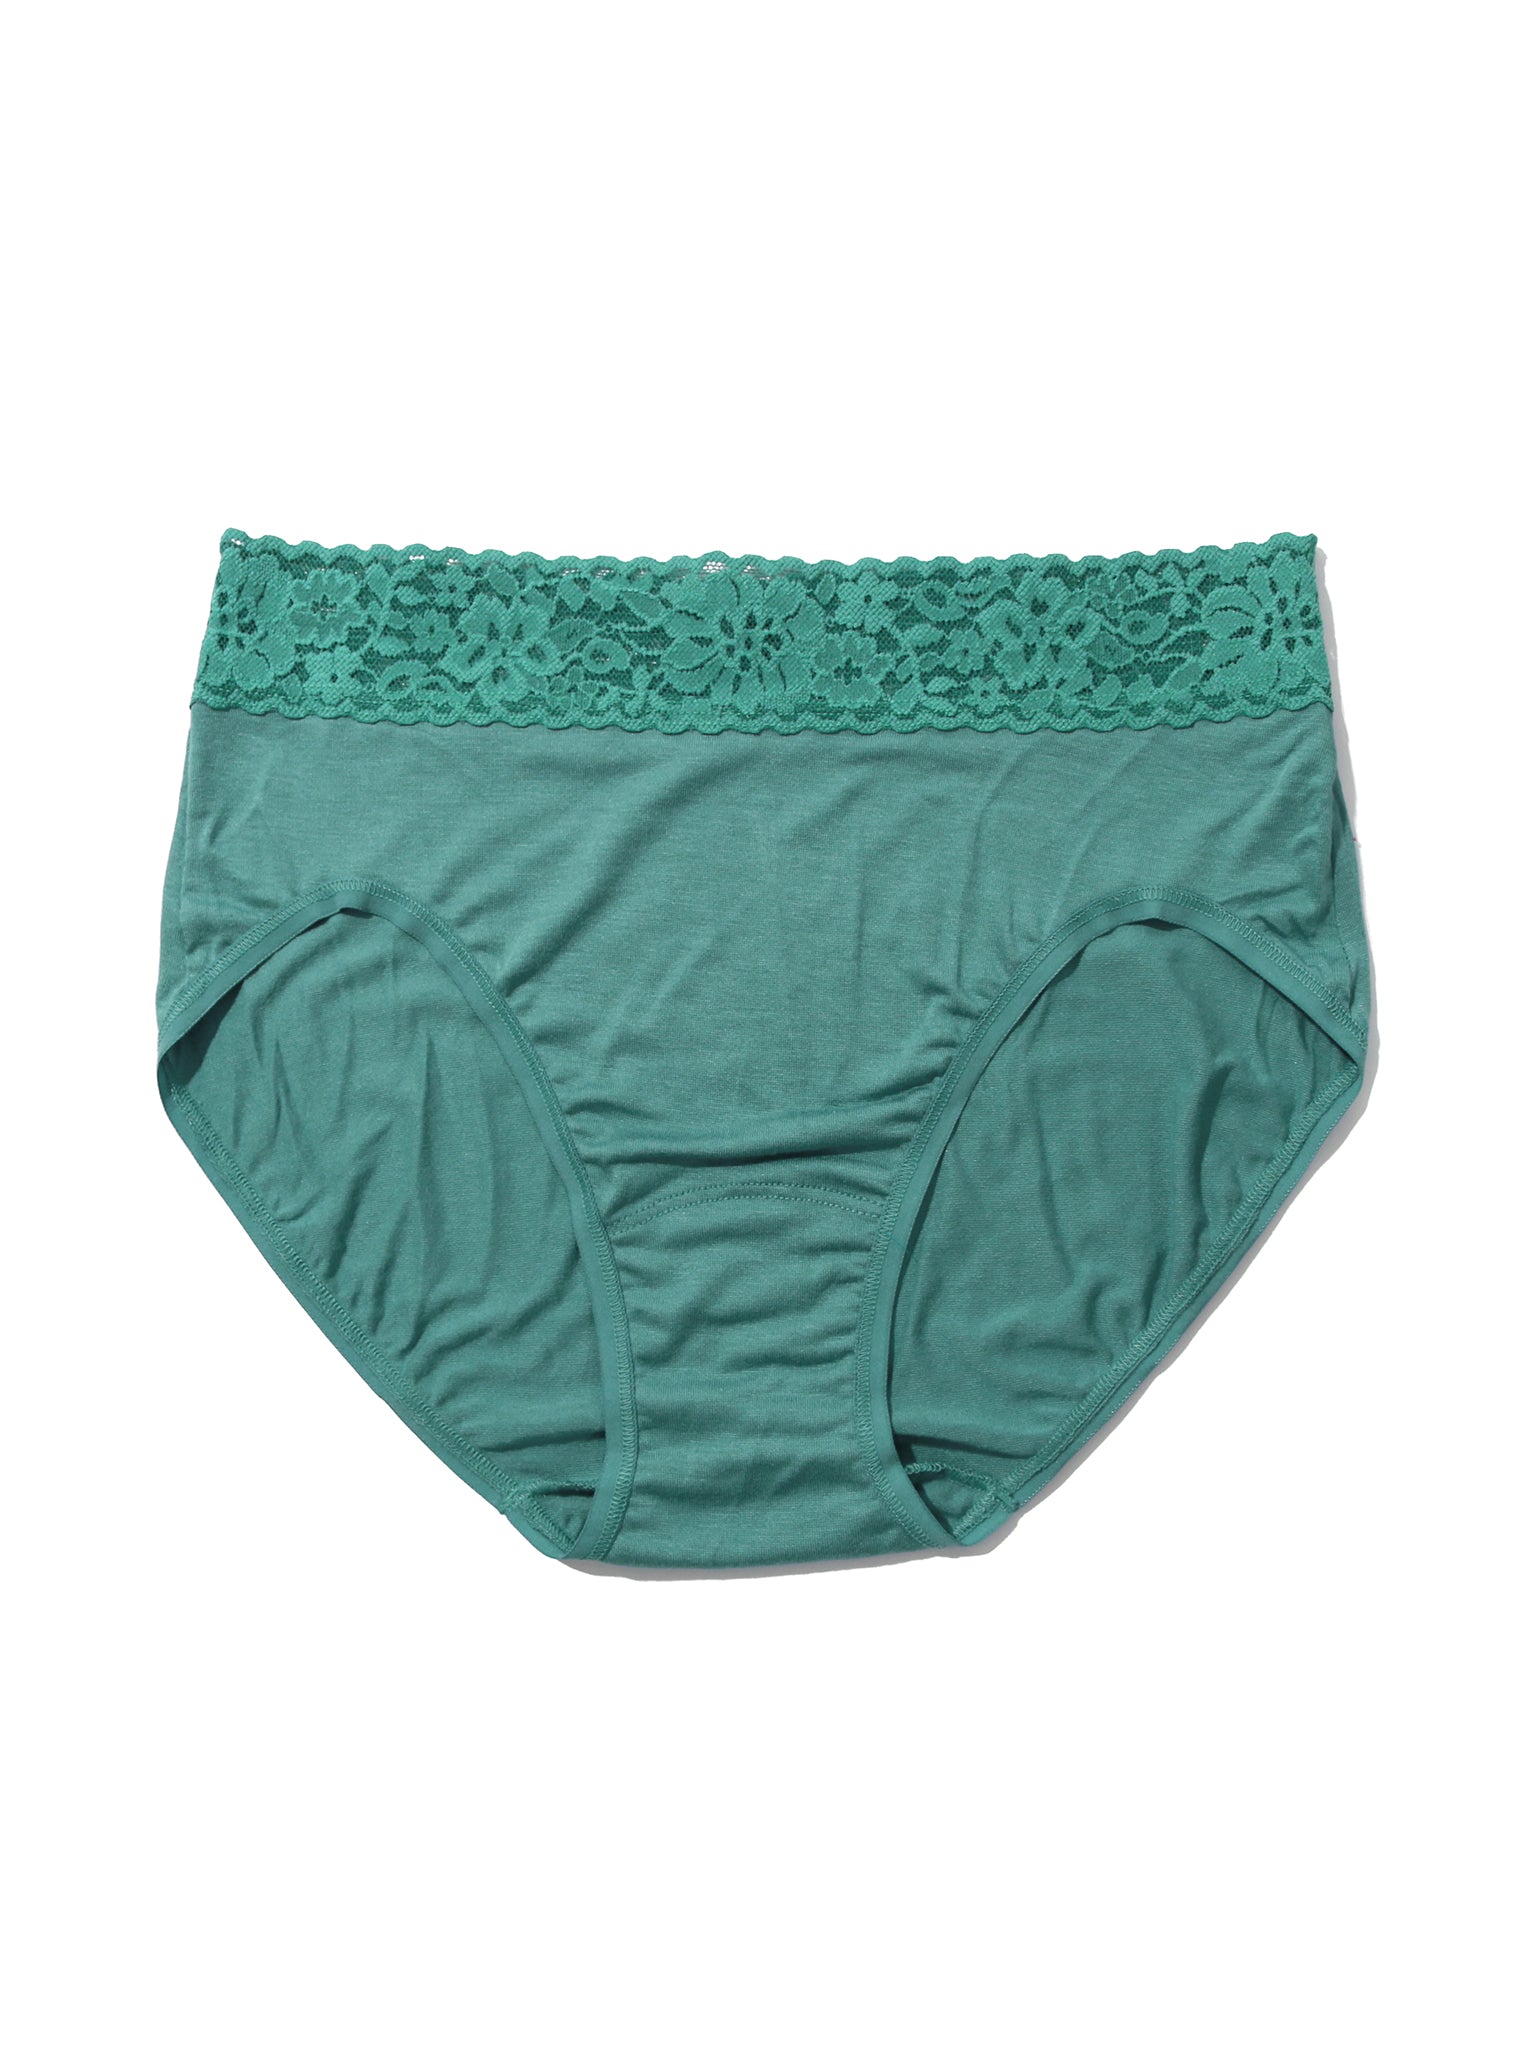 DreamEase French Brief Seaside Green